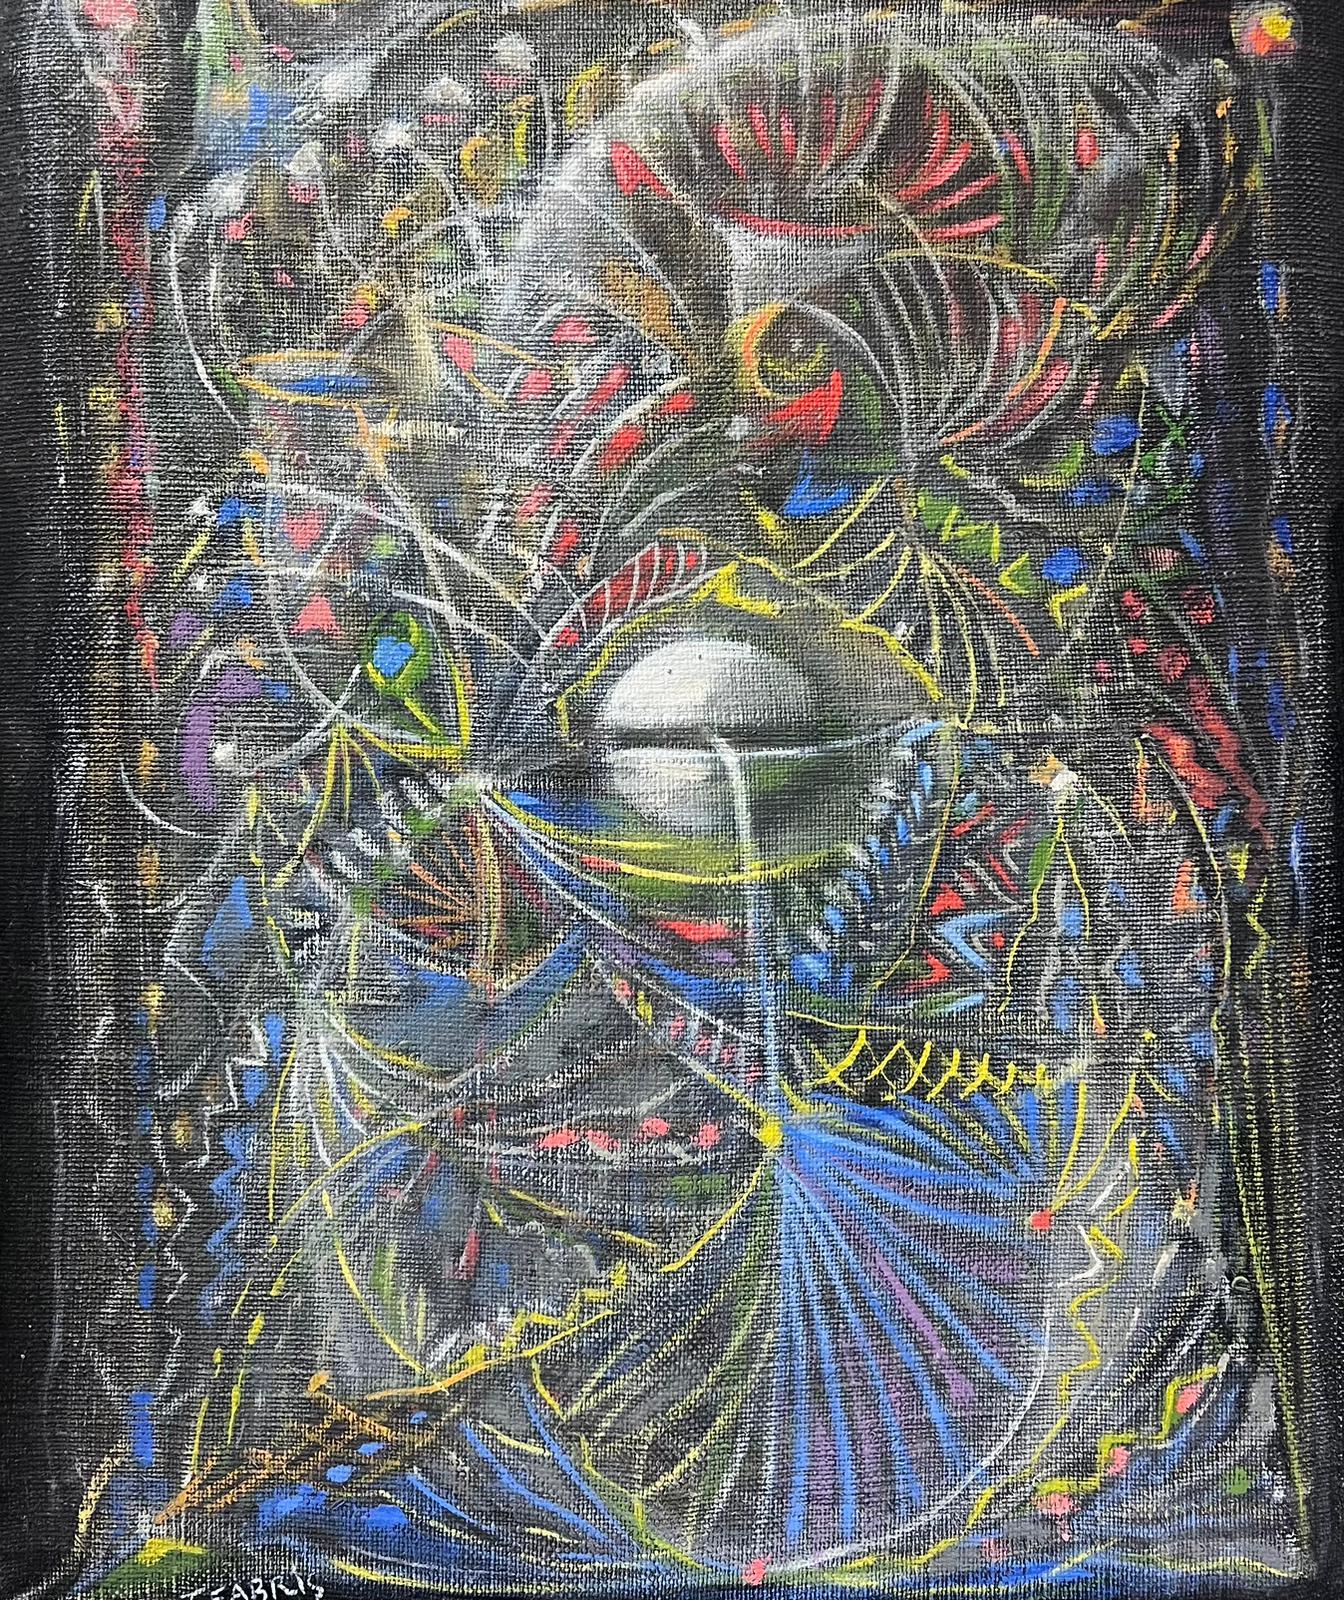 T. Fabris Abstract Painting - 1970’s French Surrealist Signed Oil Painting Spiralling Shapes & Patterns